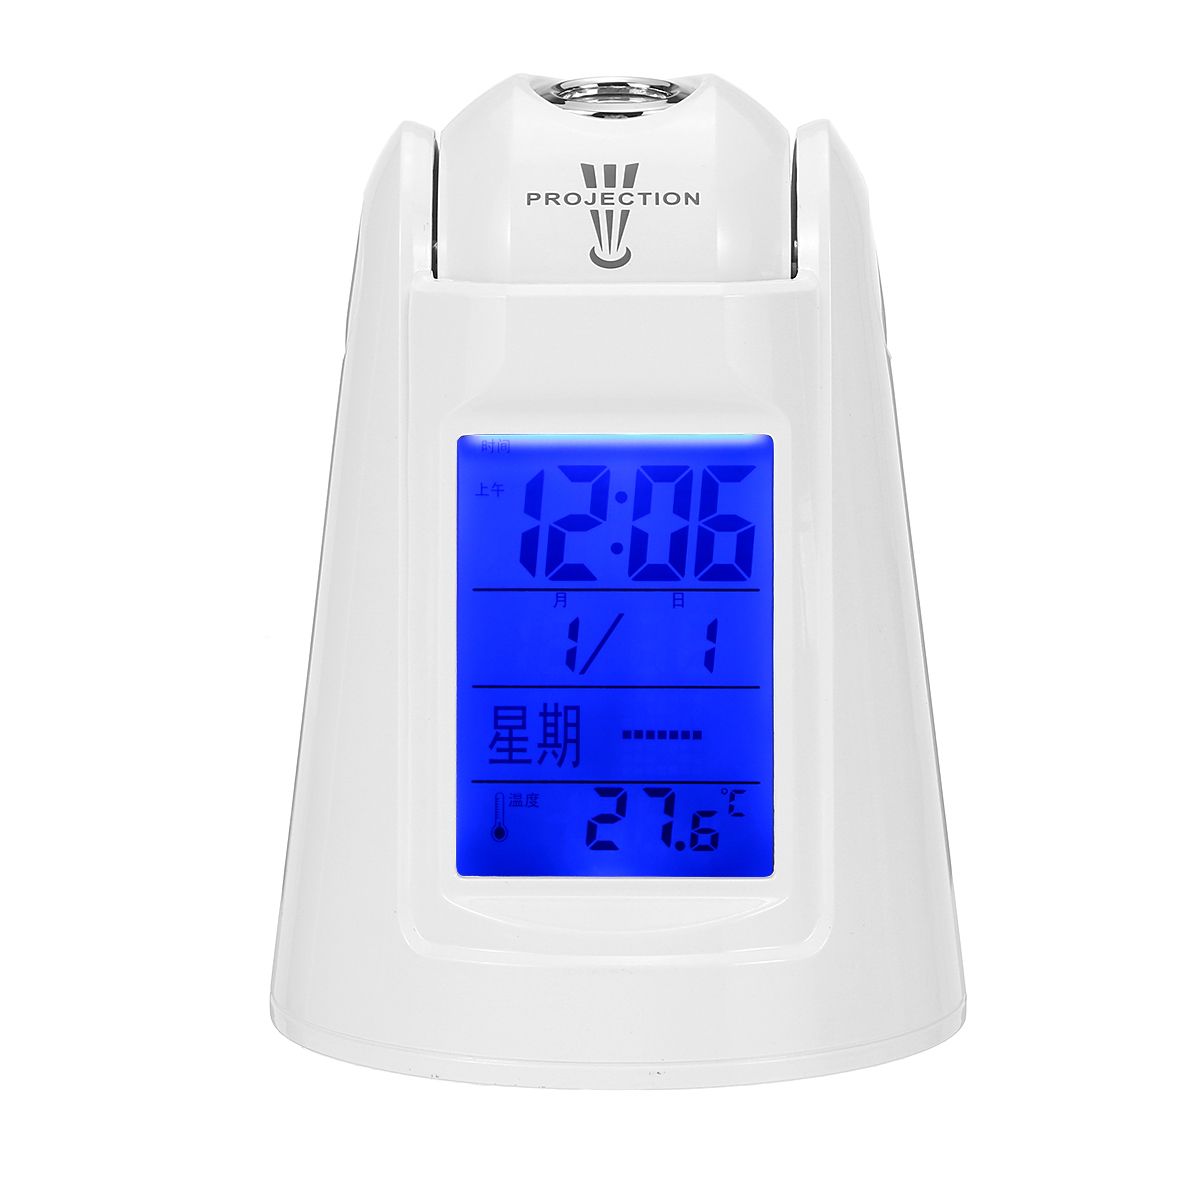 LED-Projection-Alarm-Clock-Thermometer-Snooze-Voice-Timing-Nightlight-Kids-Wake-1709073